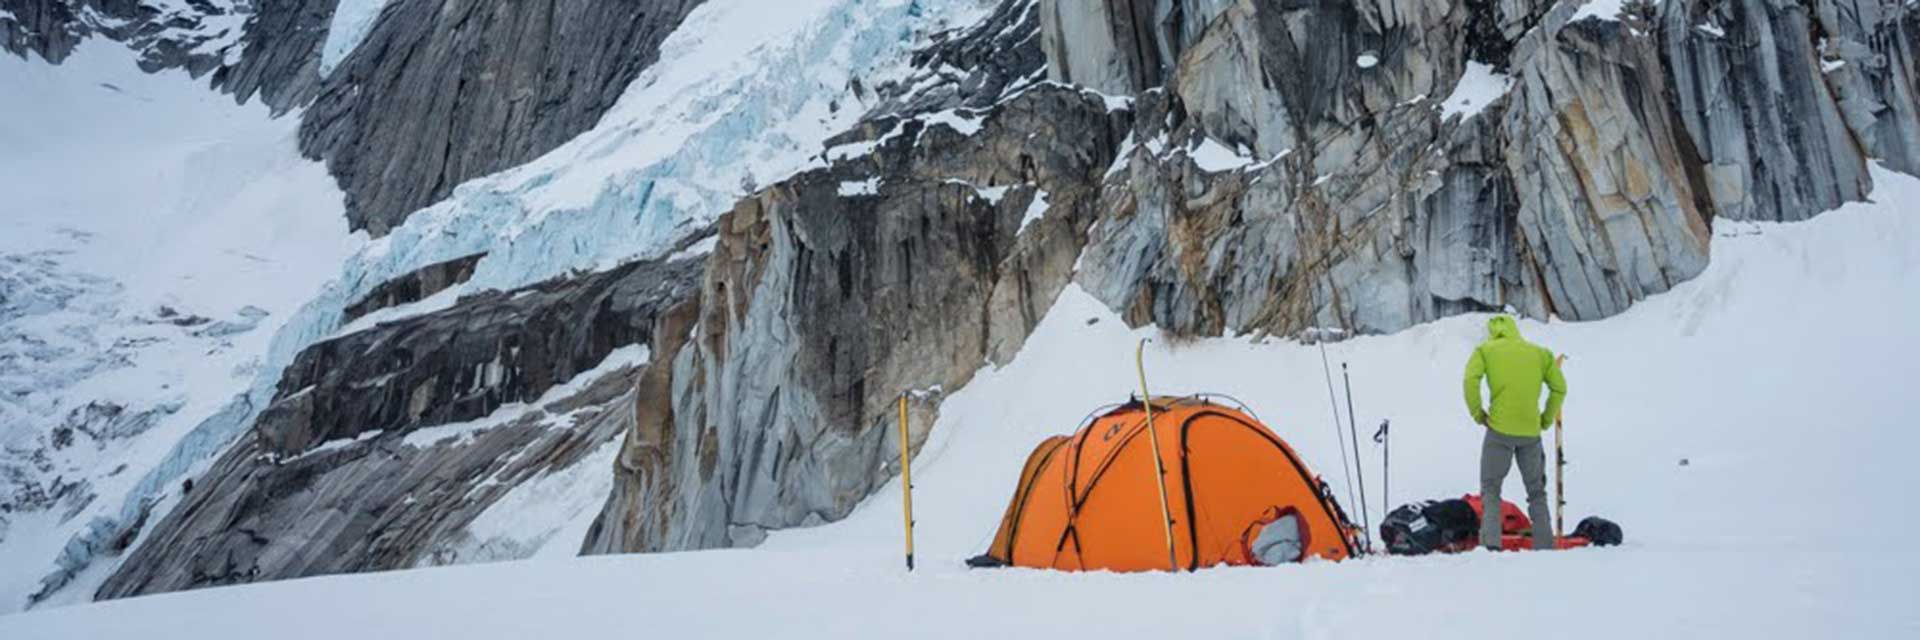 Camp at the East Buttress of Middle Triple Peak